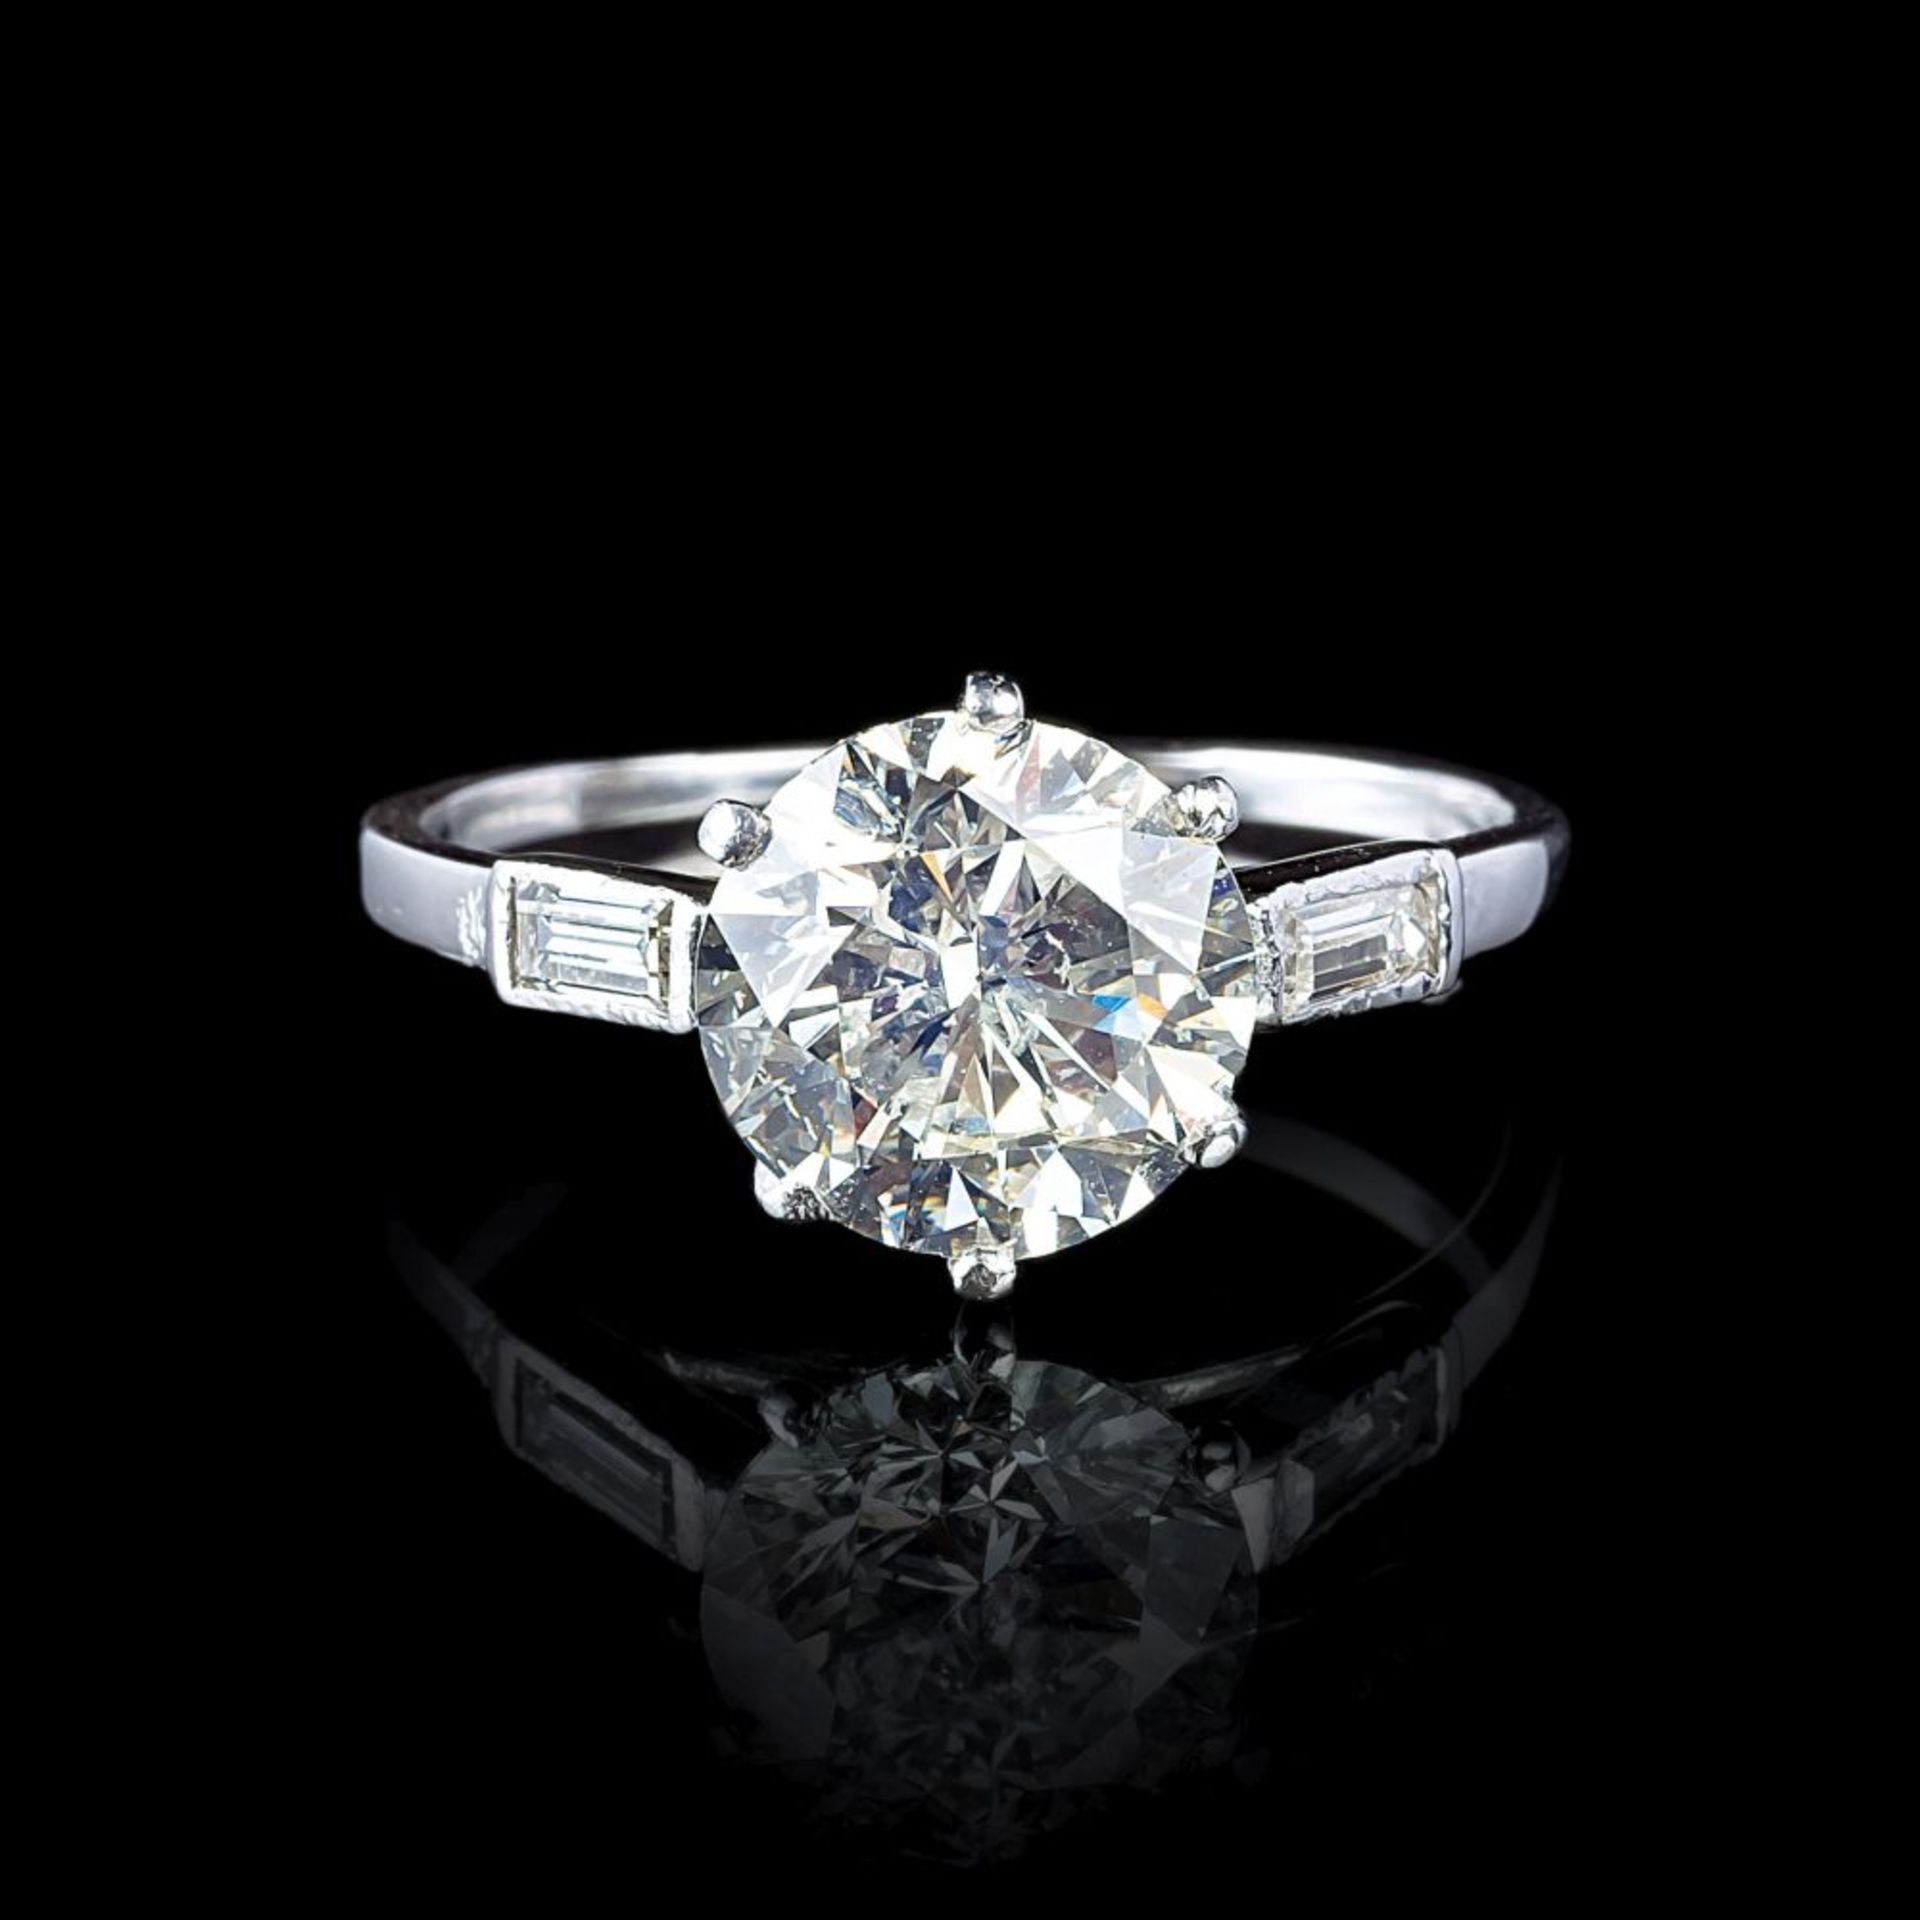 A Solitaire Diamond Ring with Diamond Baguettes.